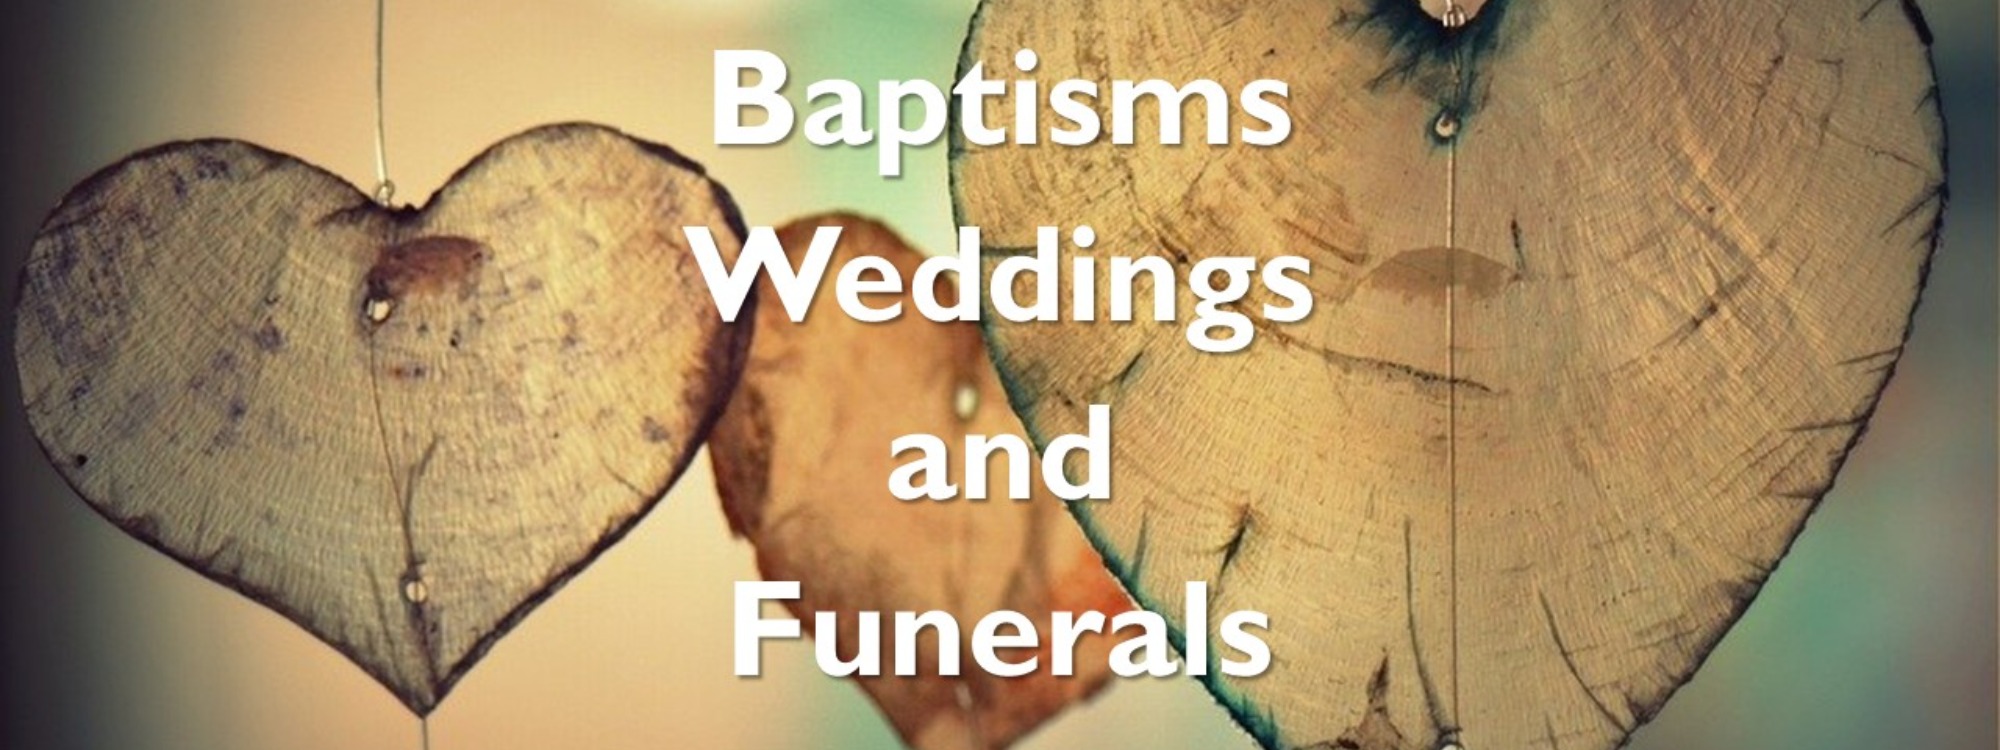 Baptisms Weddings and Funerals